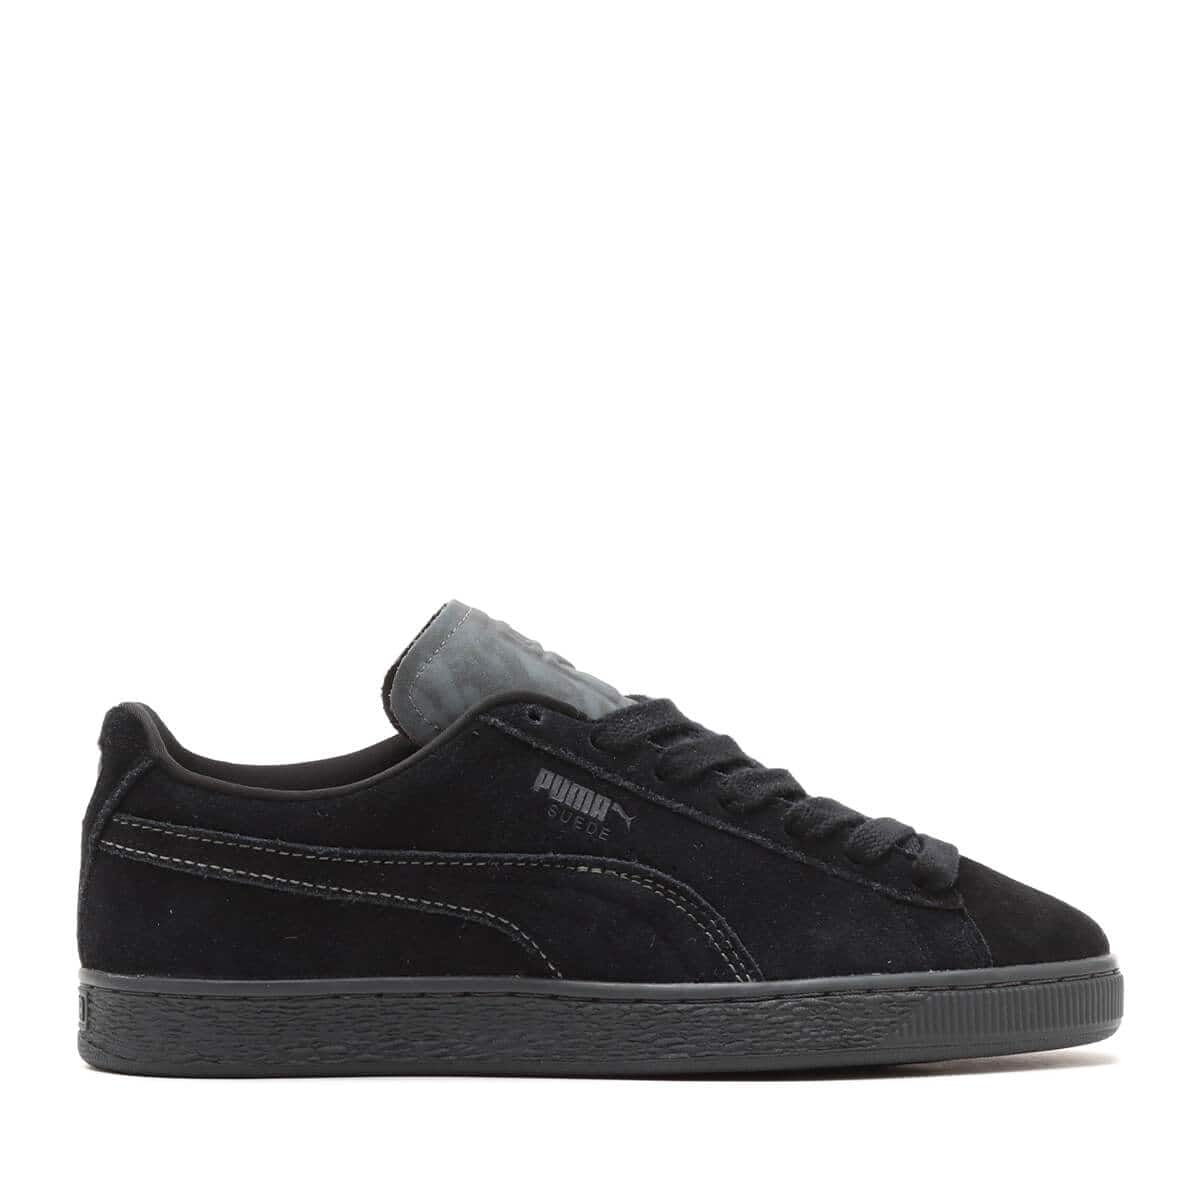 PUMA SUEDE LUX FEATHER GRAY-SILVER MIST 24SP-I